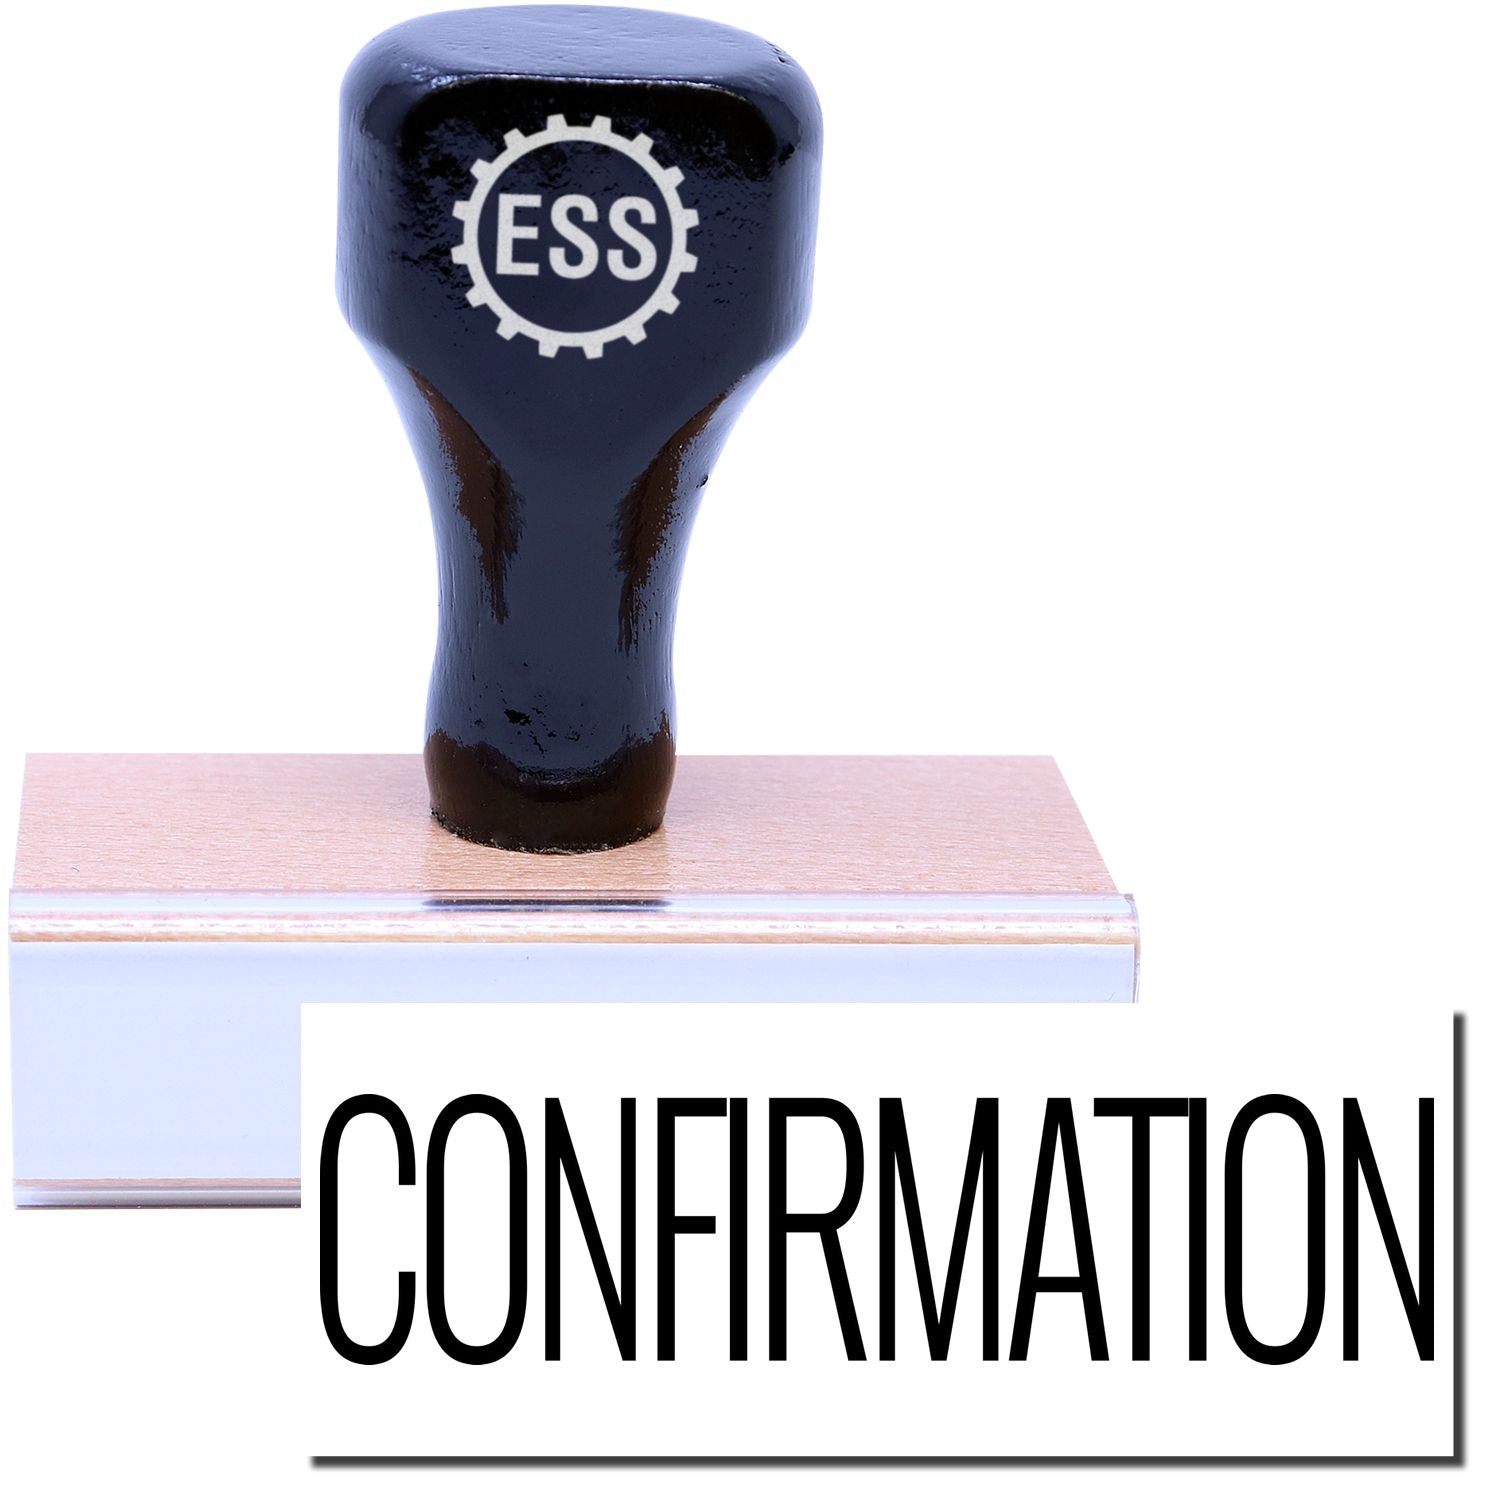 A stock office rubber stamp with a stamped image showing how the text "CONFIRMATION" is displayed after stamping.